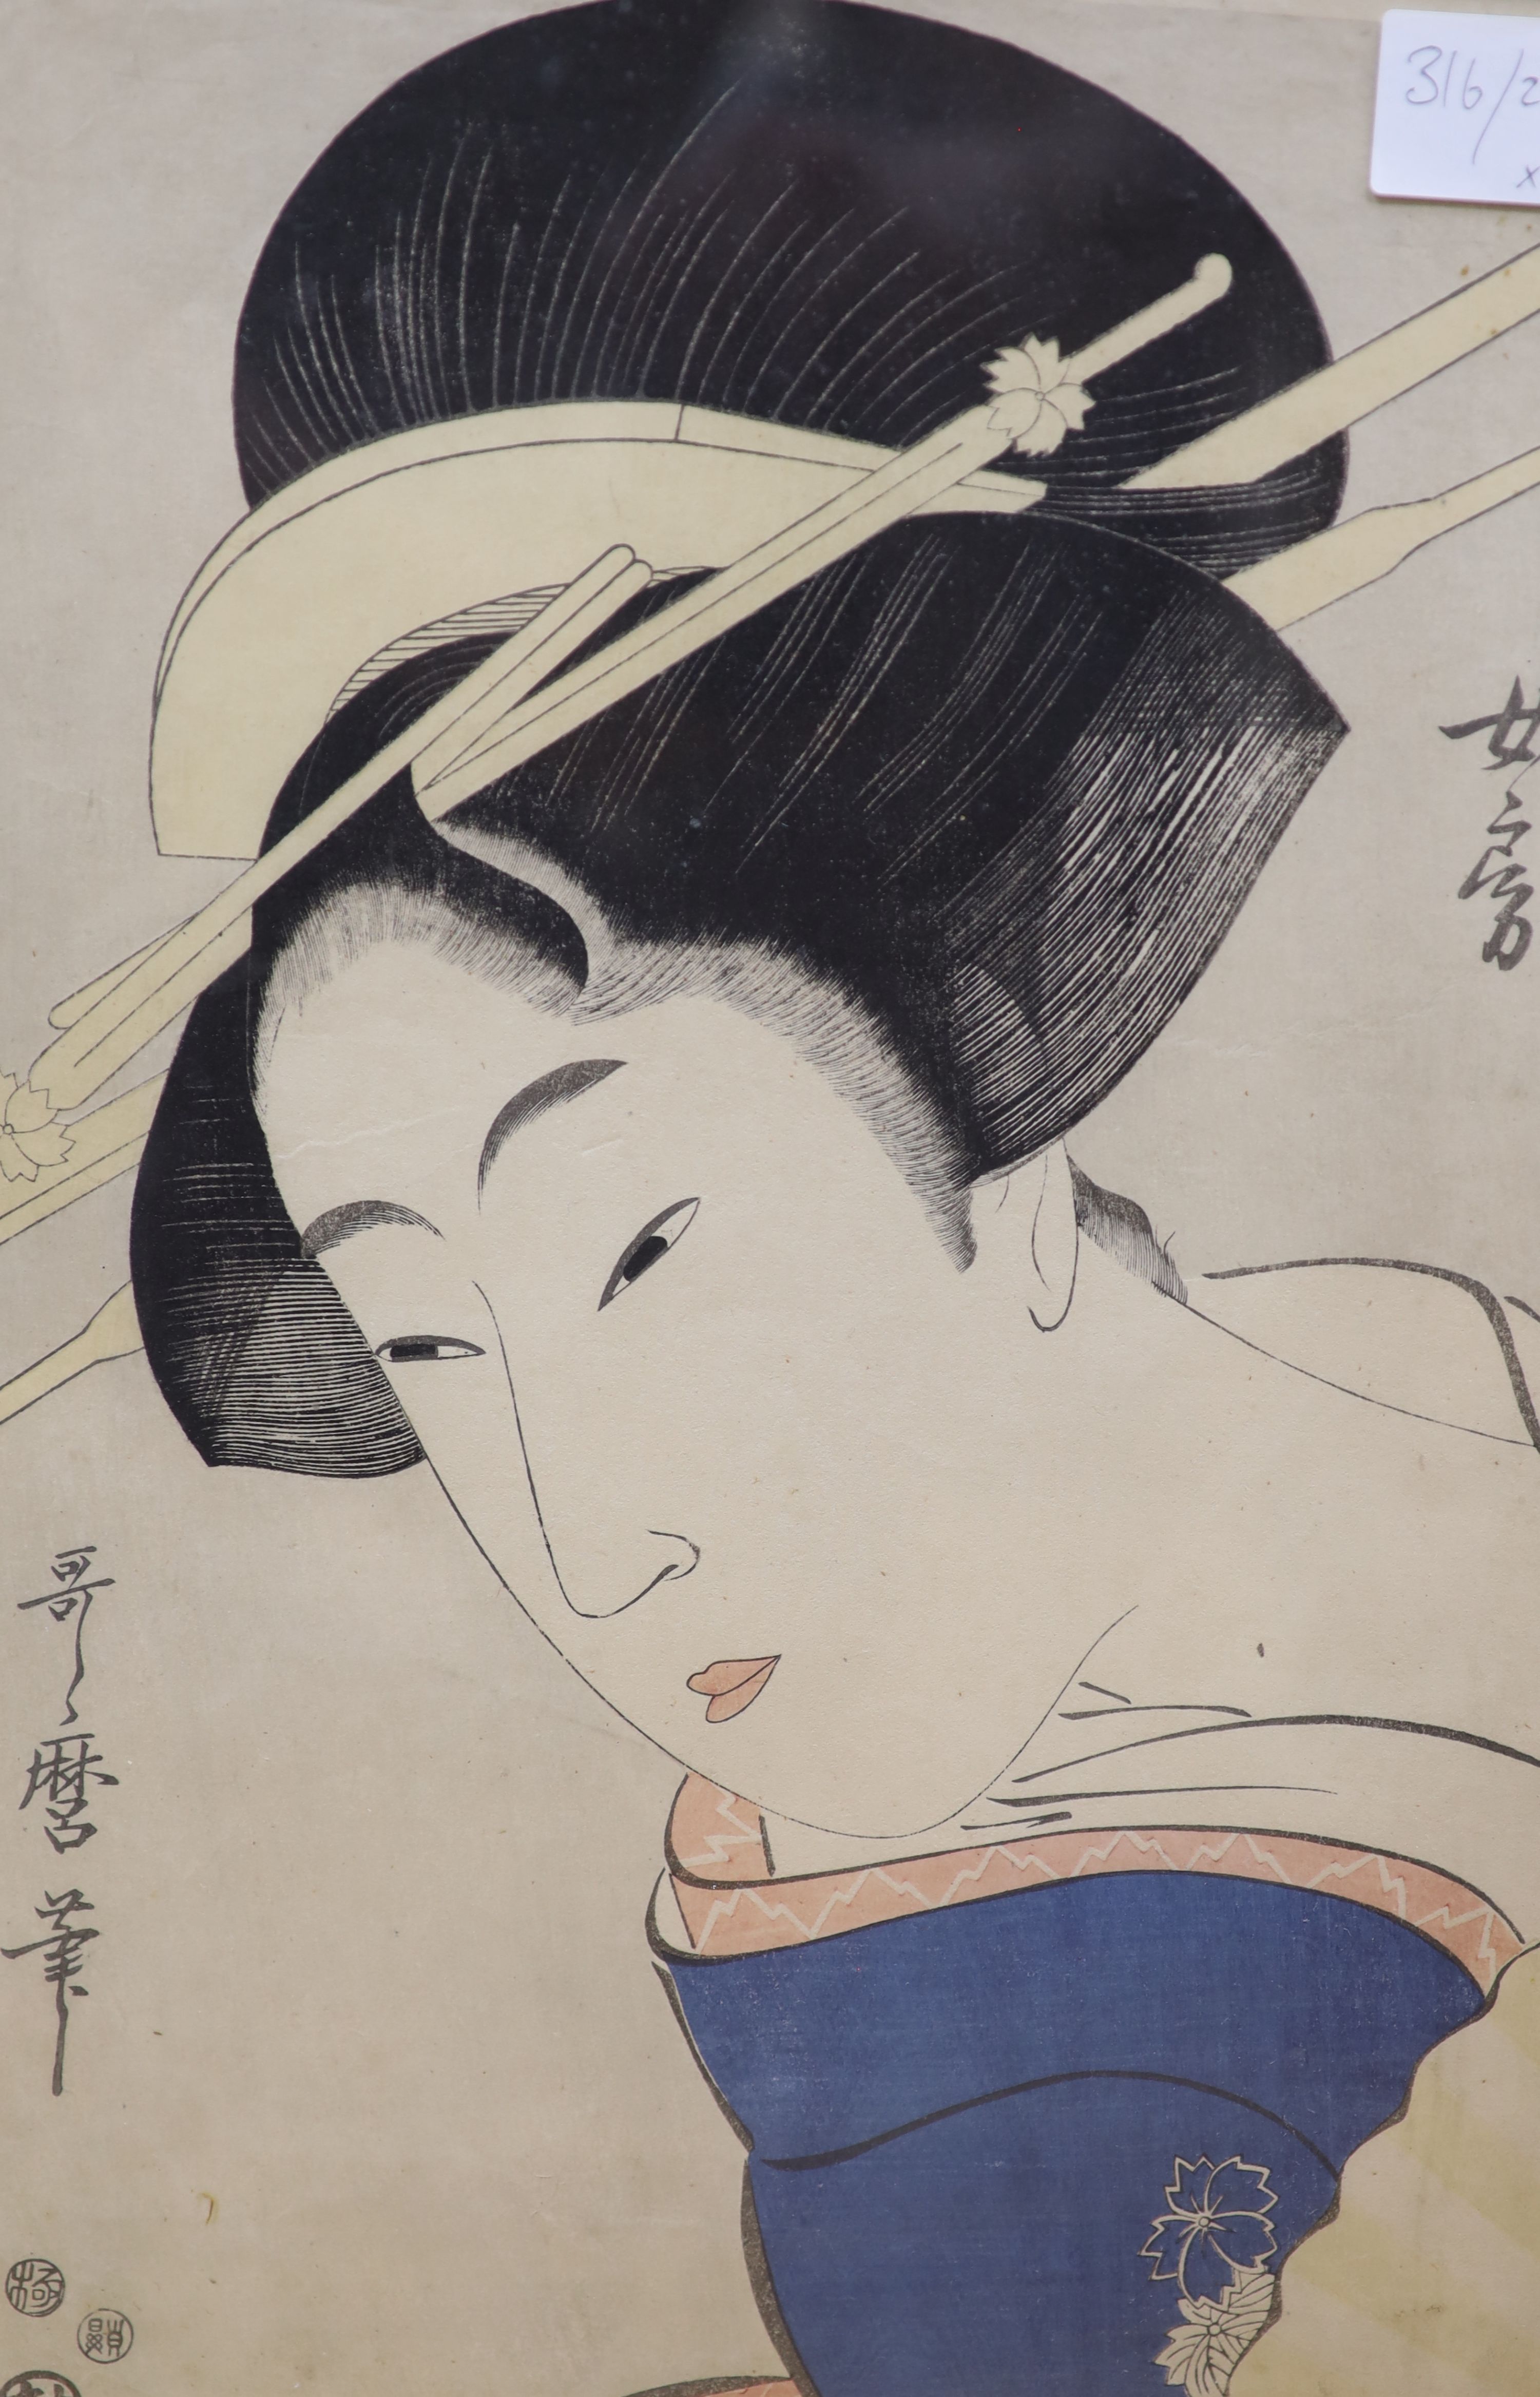 Japanese School, two woodblock prints, Woman serving tea and Head study, largest 37 x 25cm